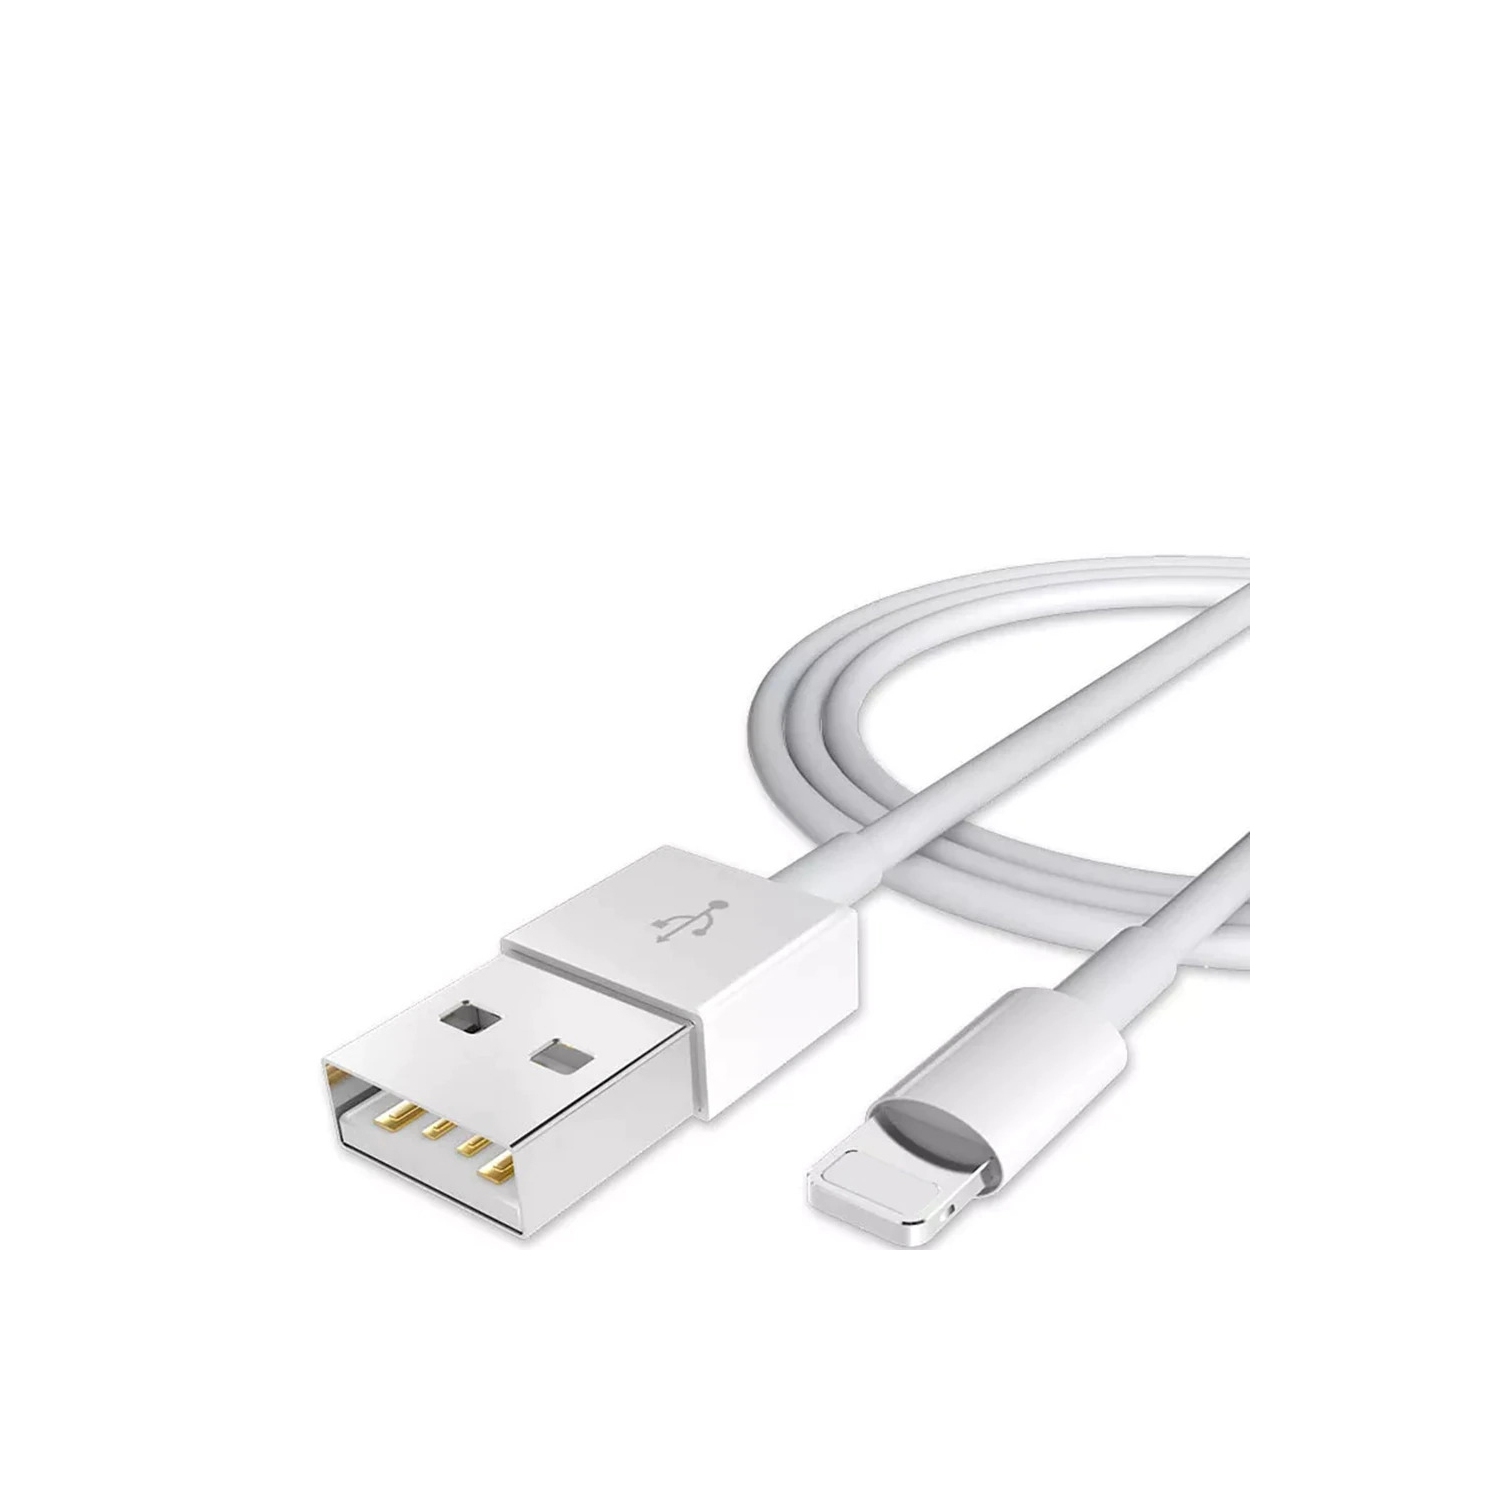 6ft iPhone USB Charger Cable for Apple Lightning Charging Cord for iPhone 14/13/12/11/X/Xs Max/XR/8 Plus/7/6/6s/SE/5c/5s/5 iPad Air 2/Mini